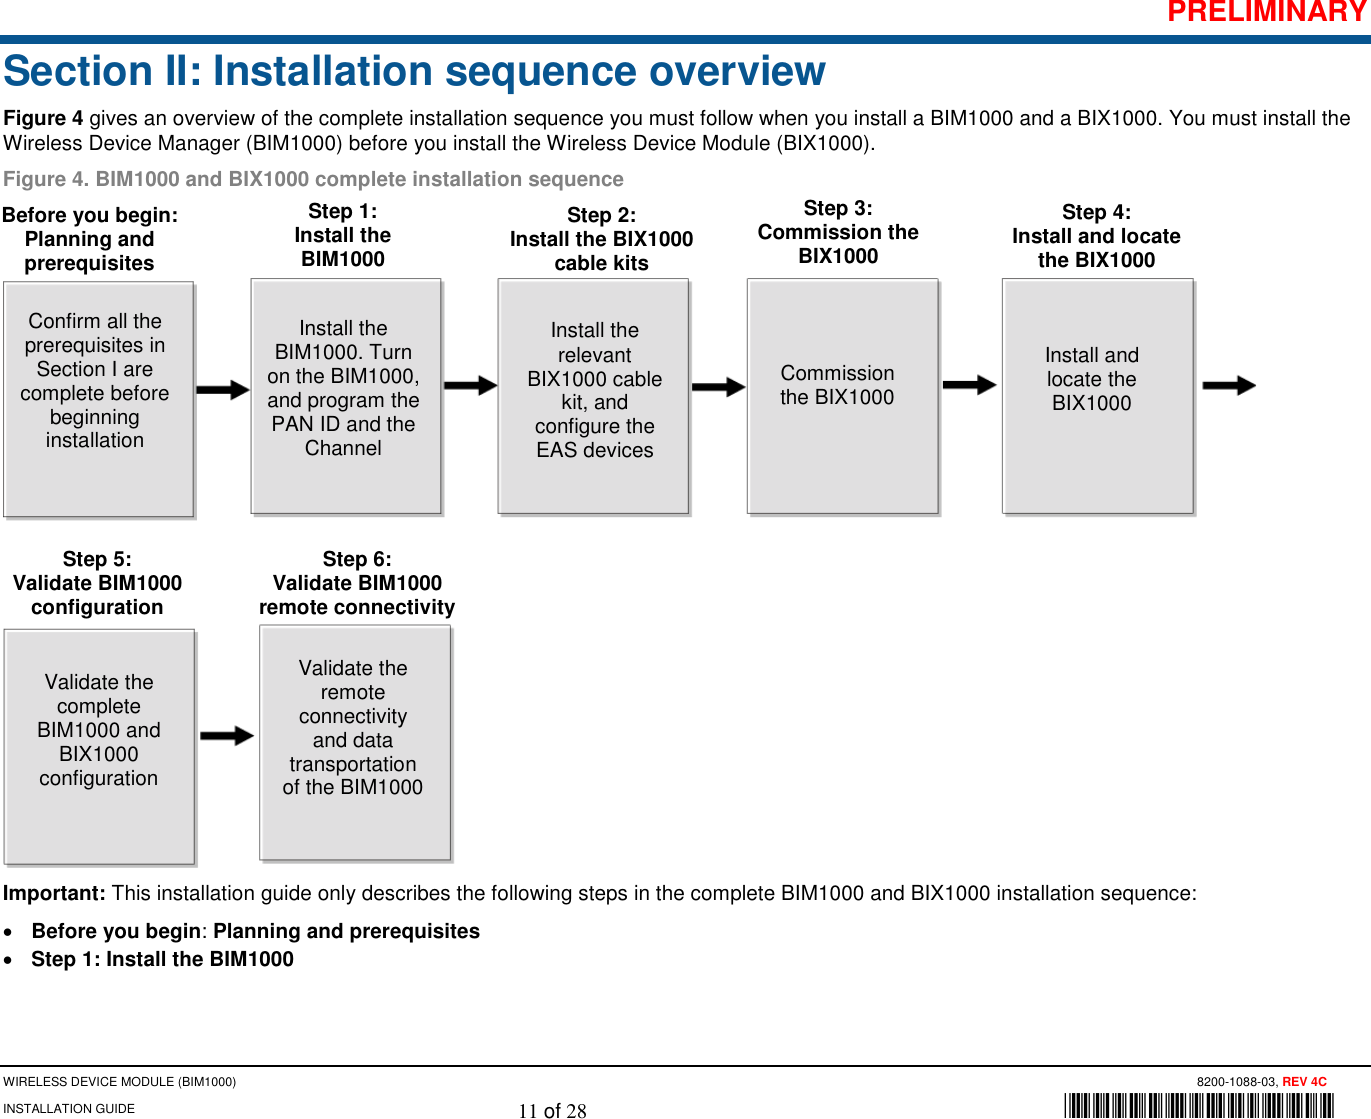 PRELIMINARY WIRELESS DEVICE MODULE (BIM1000)             8200-1088-03, REV 4C INSTALLATION GUIDE    11 of 28             *8200-1088-15* Section II: Installation sequence overview Figure 4 gives an overview of the complete installation sequence you must follow when you install a BIM1000 and a BIX1000. You must install the Wireless Device Manager (BIM1000) before you install the Wireless Device Module (BIX1000).  Figure 4. BIM1000 and BIX1000 complete installation sequence  Important: This installation guide only describes the following steps in the complete BIM1000 and BIX1000 installation sequence: • Before you begin: Planning and prerequisites • Step 1: Install the BIM1000  Before you begin: Planning and prerequisites Step 2: Install the BIX1000 cable kits Step 4: Install and locate the BIX1000 Step 5: Validate BIM1000 configuration Step 6: Validate BIM1000 remote connectivity Install the BIM1000. Turn on the BIM1000, and program the PAN ID and the Channel Install the relevant BIX1000 cable kit, and configure the EAS devices Install and locate the BIX1000 Validate the complete BIM1000 and BIX1000 configuration Validate the remote connectivity and data transportation of the BIM1000 Commission the BIX1000 Step 3: Commission the BIX1000 Step 1: Install the BIM1000 Confirm all the prerequisites in Section I are complete before beginning installation 